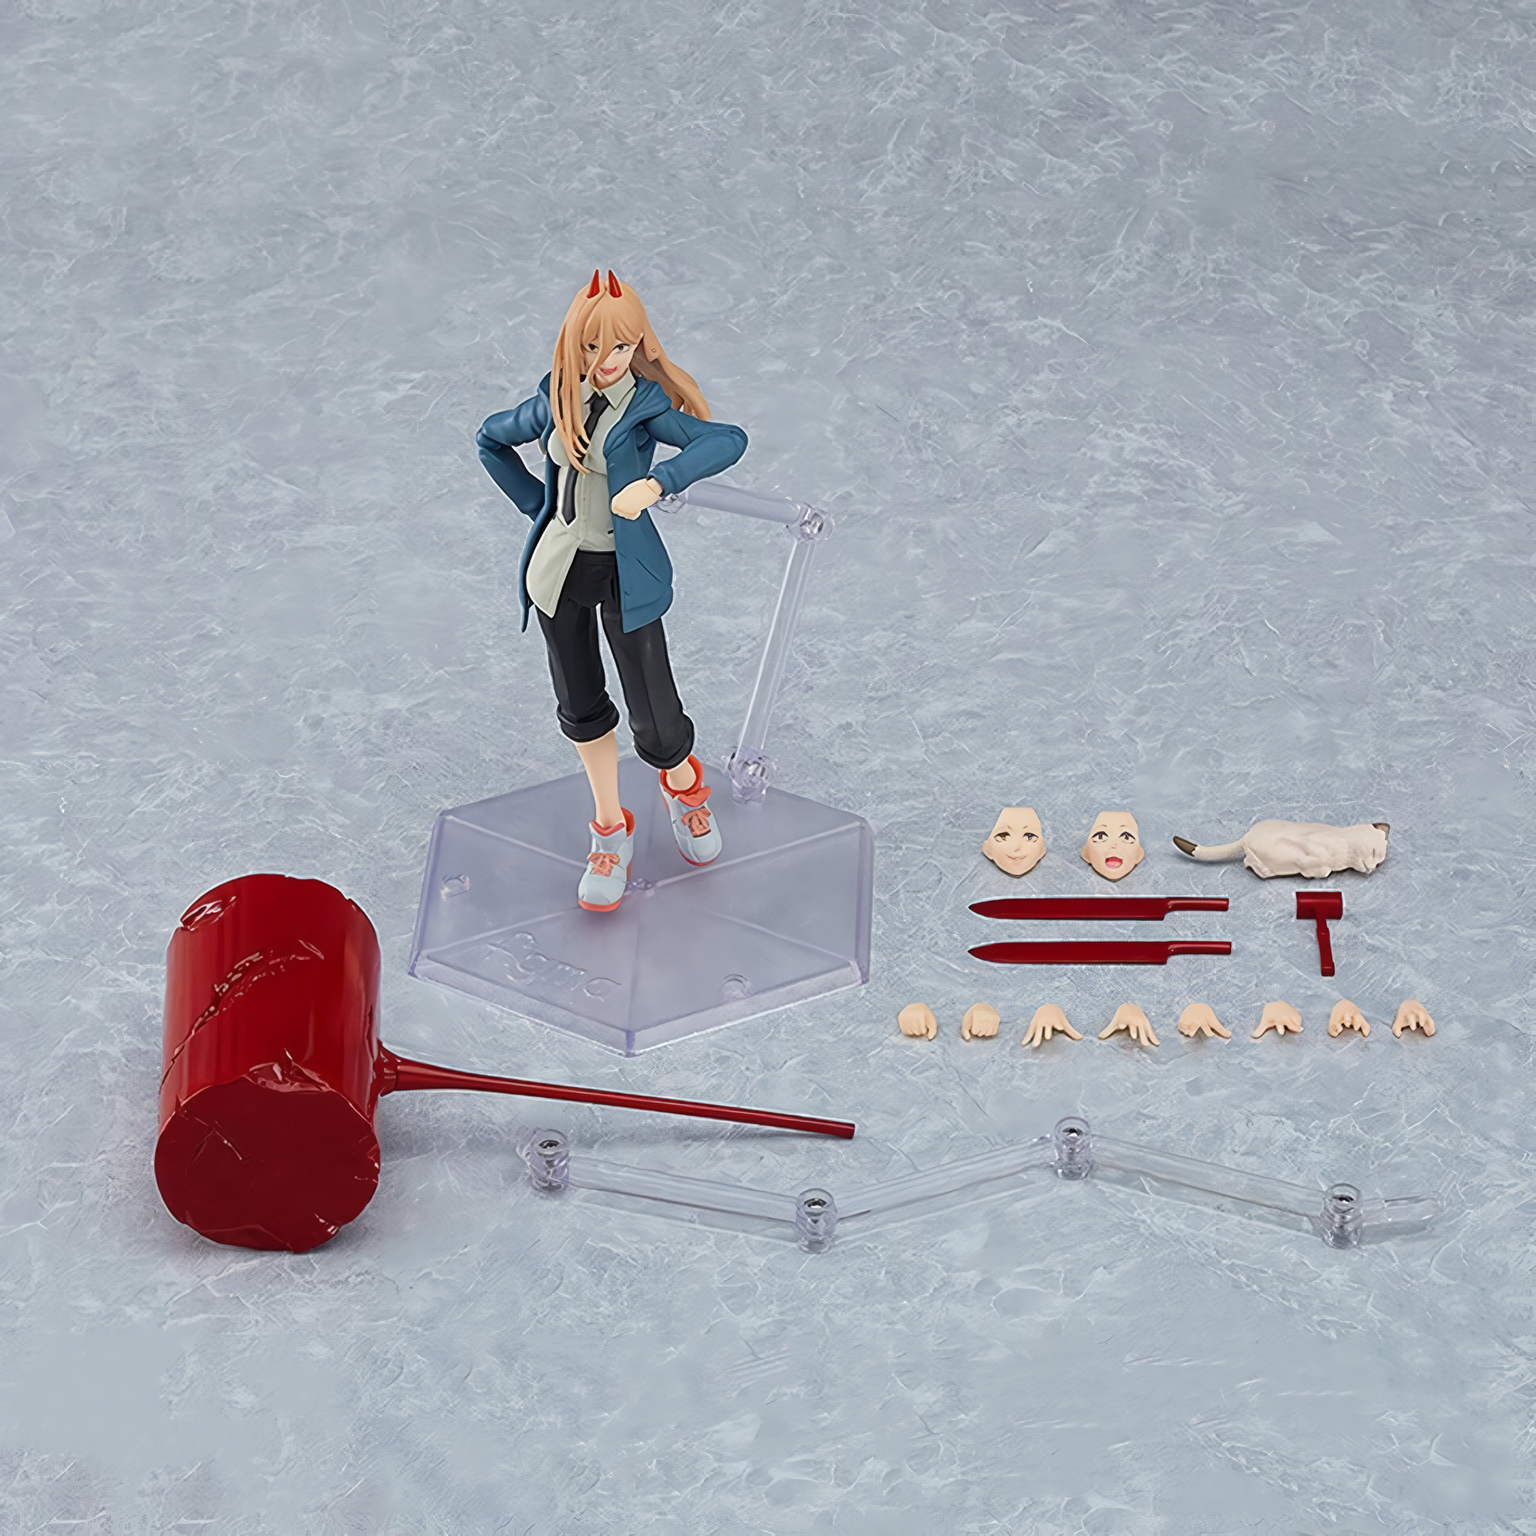 This figurine set features a dynamic Power figurine accompanied by an adjustable stand, complemented by accessories including one Blood Hammer, two Blood Knives, one Blood Mallet, two Adjustable Faces, four sets of Adjustable Hands, and her faithful cat companion.